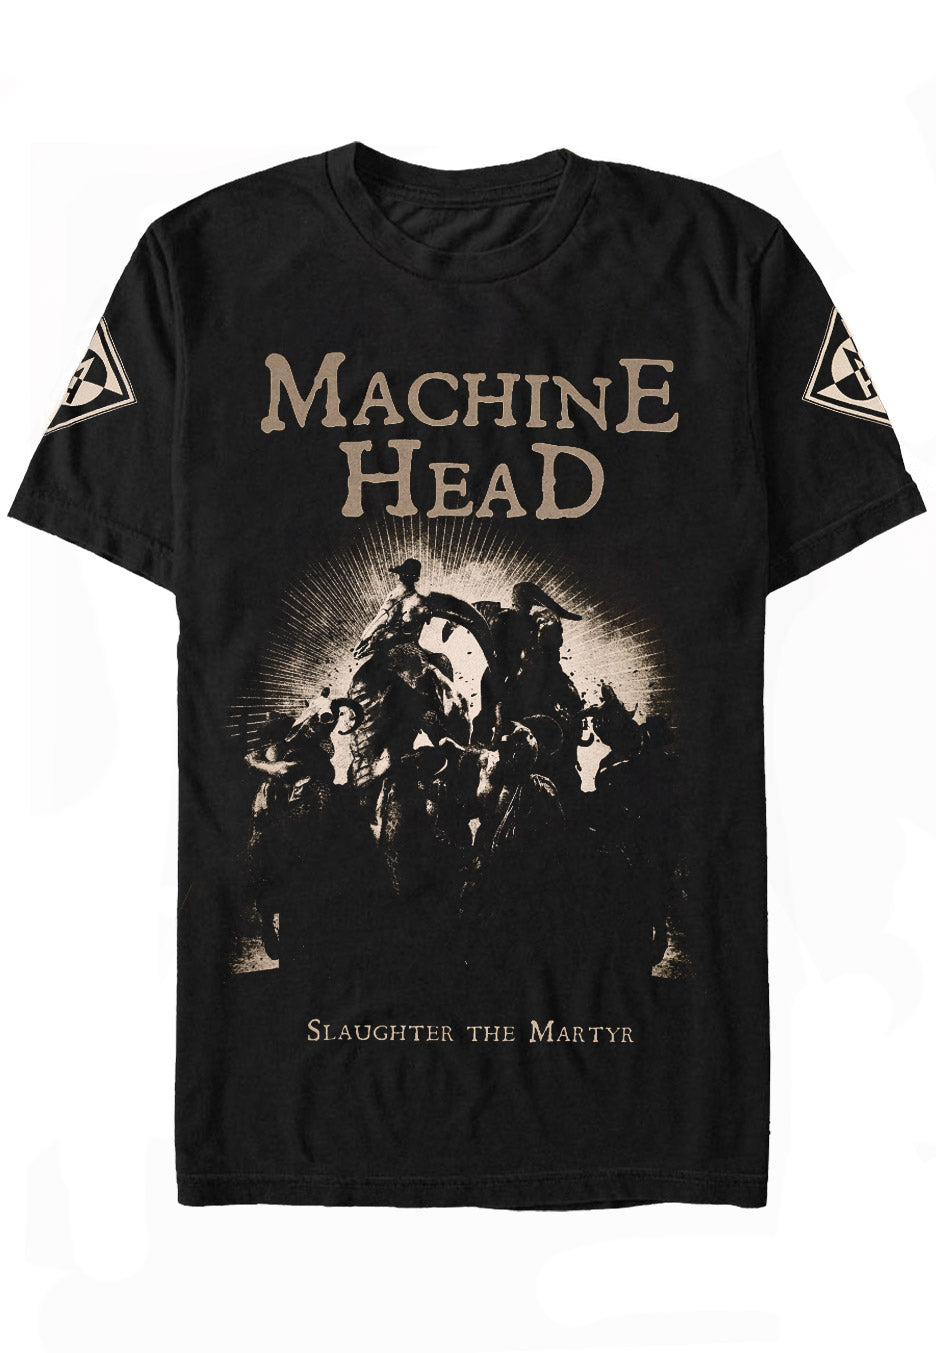 Machine Head - Slaughter The Martyr - T-Shirt